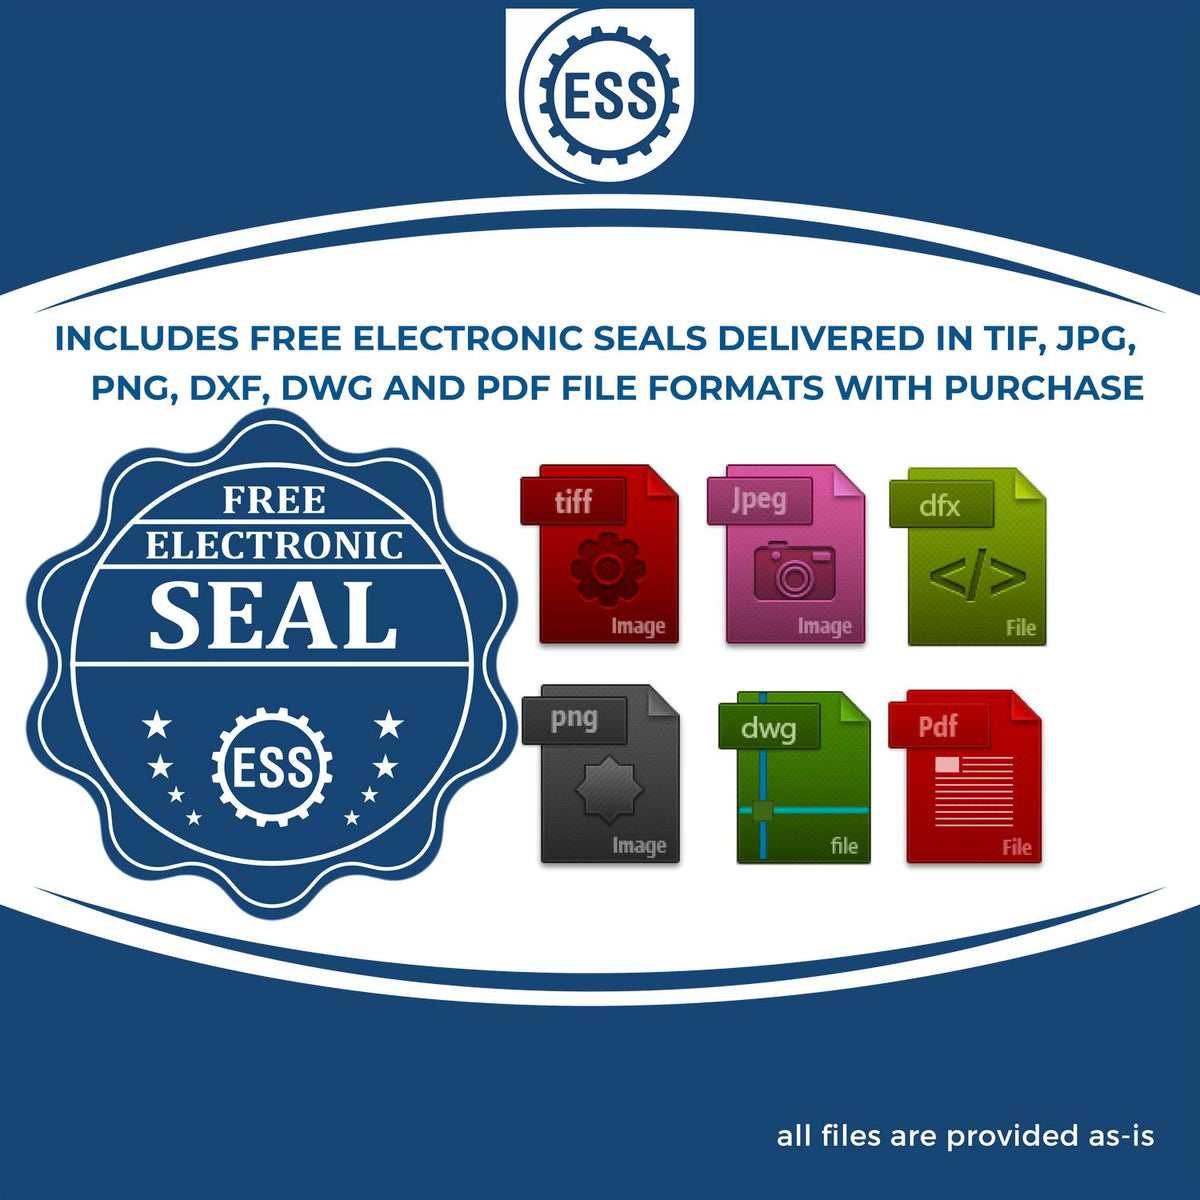 An infographic for the free electronic seal for the Long Reach Georgia PE Seal illustrating the different file type icons such as DXF, DWG, TIF, JPG and PNG.